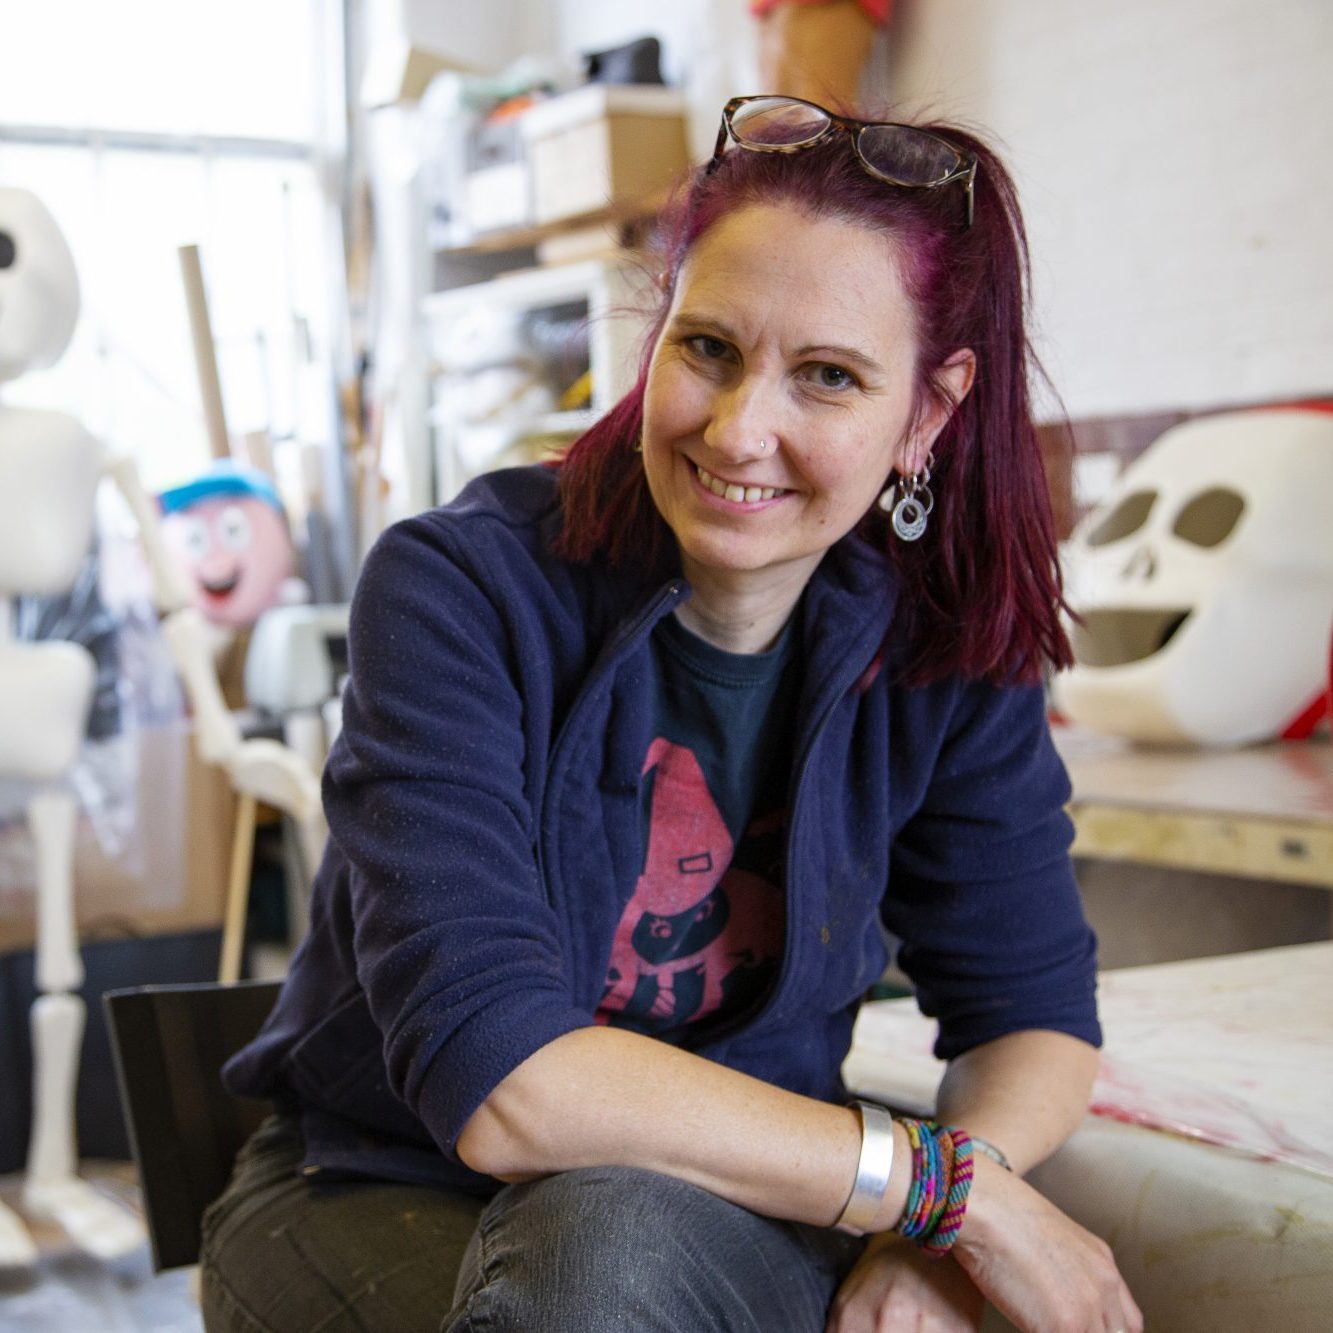 A woman with vibrant red hair and a warm smile sits casually in a puppet-making workshop. Behind her, an array of whimsical puppet figures with exaggerated skull-like faces are perched, showcasing different stages of the creative process. She wears a dark jacket over a playful t-shirt, and her sunglasses are perched atop her head, suggesting a lively and artistic work environment.